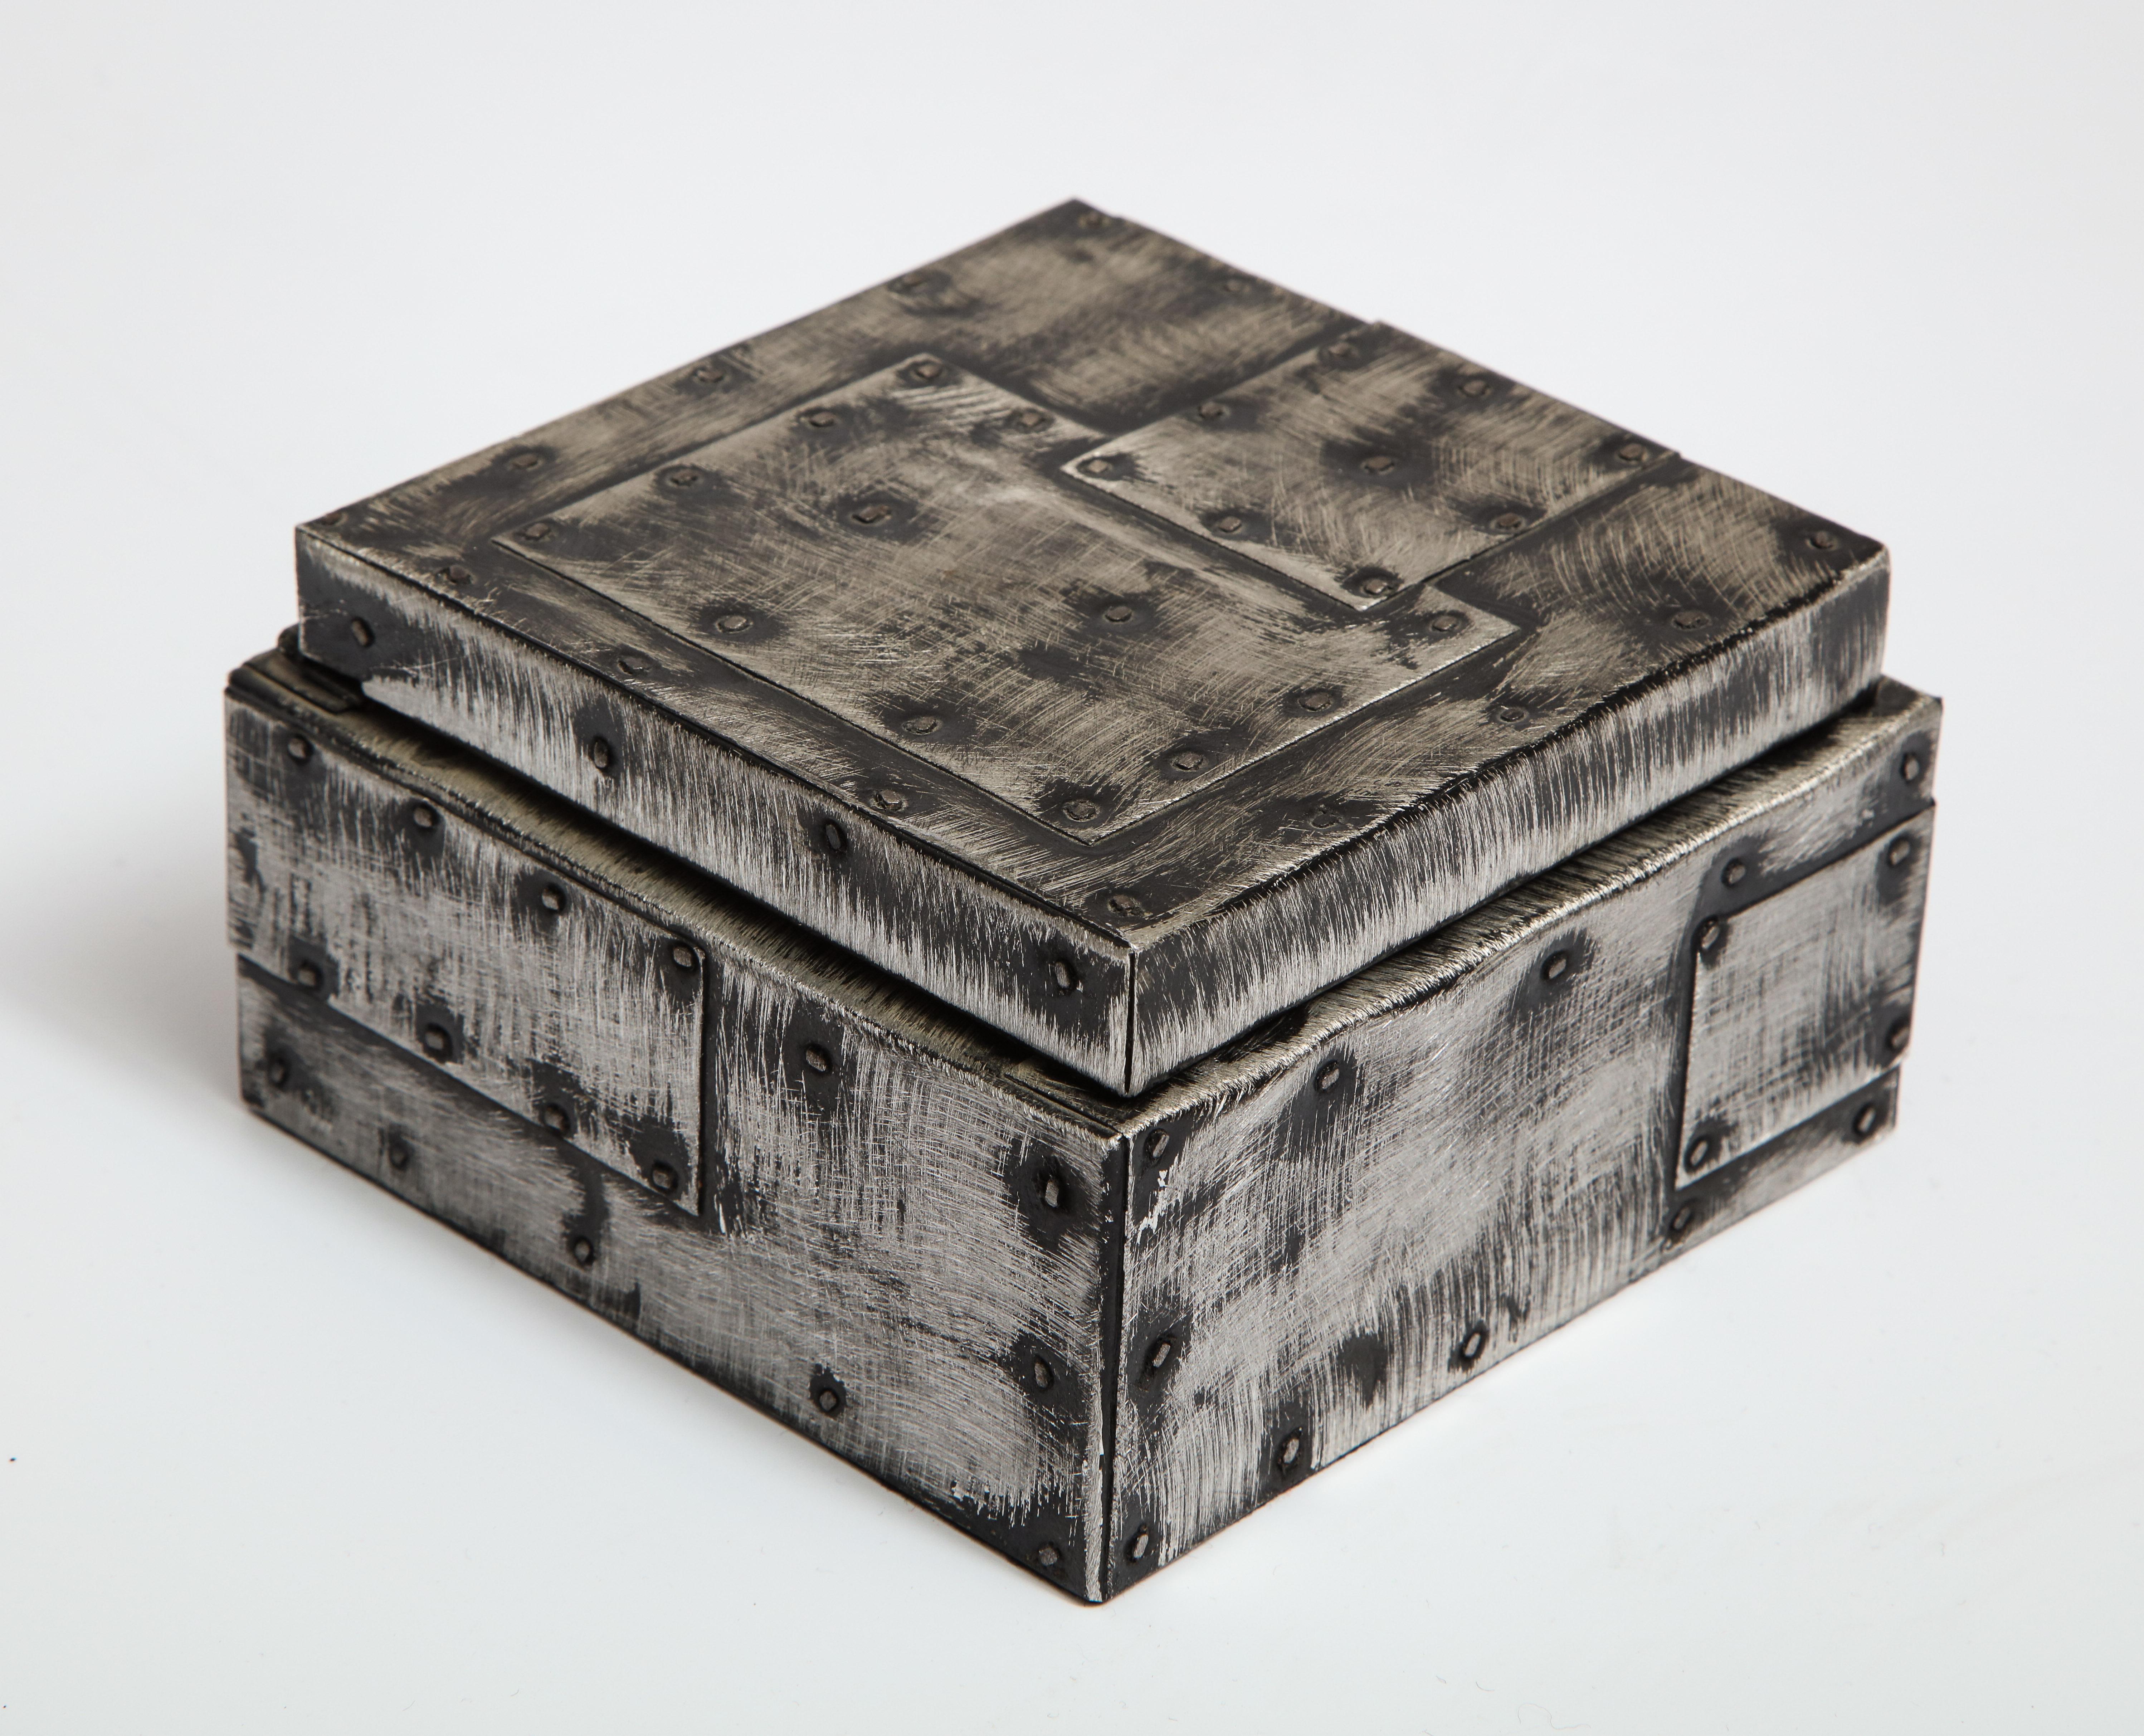 Paul Evans Humidor Box, Argente Patchwork, Signed. Hinged hand tooled mixed metal humidor box with dark pewter argente patchwork finish. We purchased this humidor along with an square ashtray (available in another listing). The interior is lined